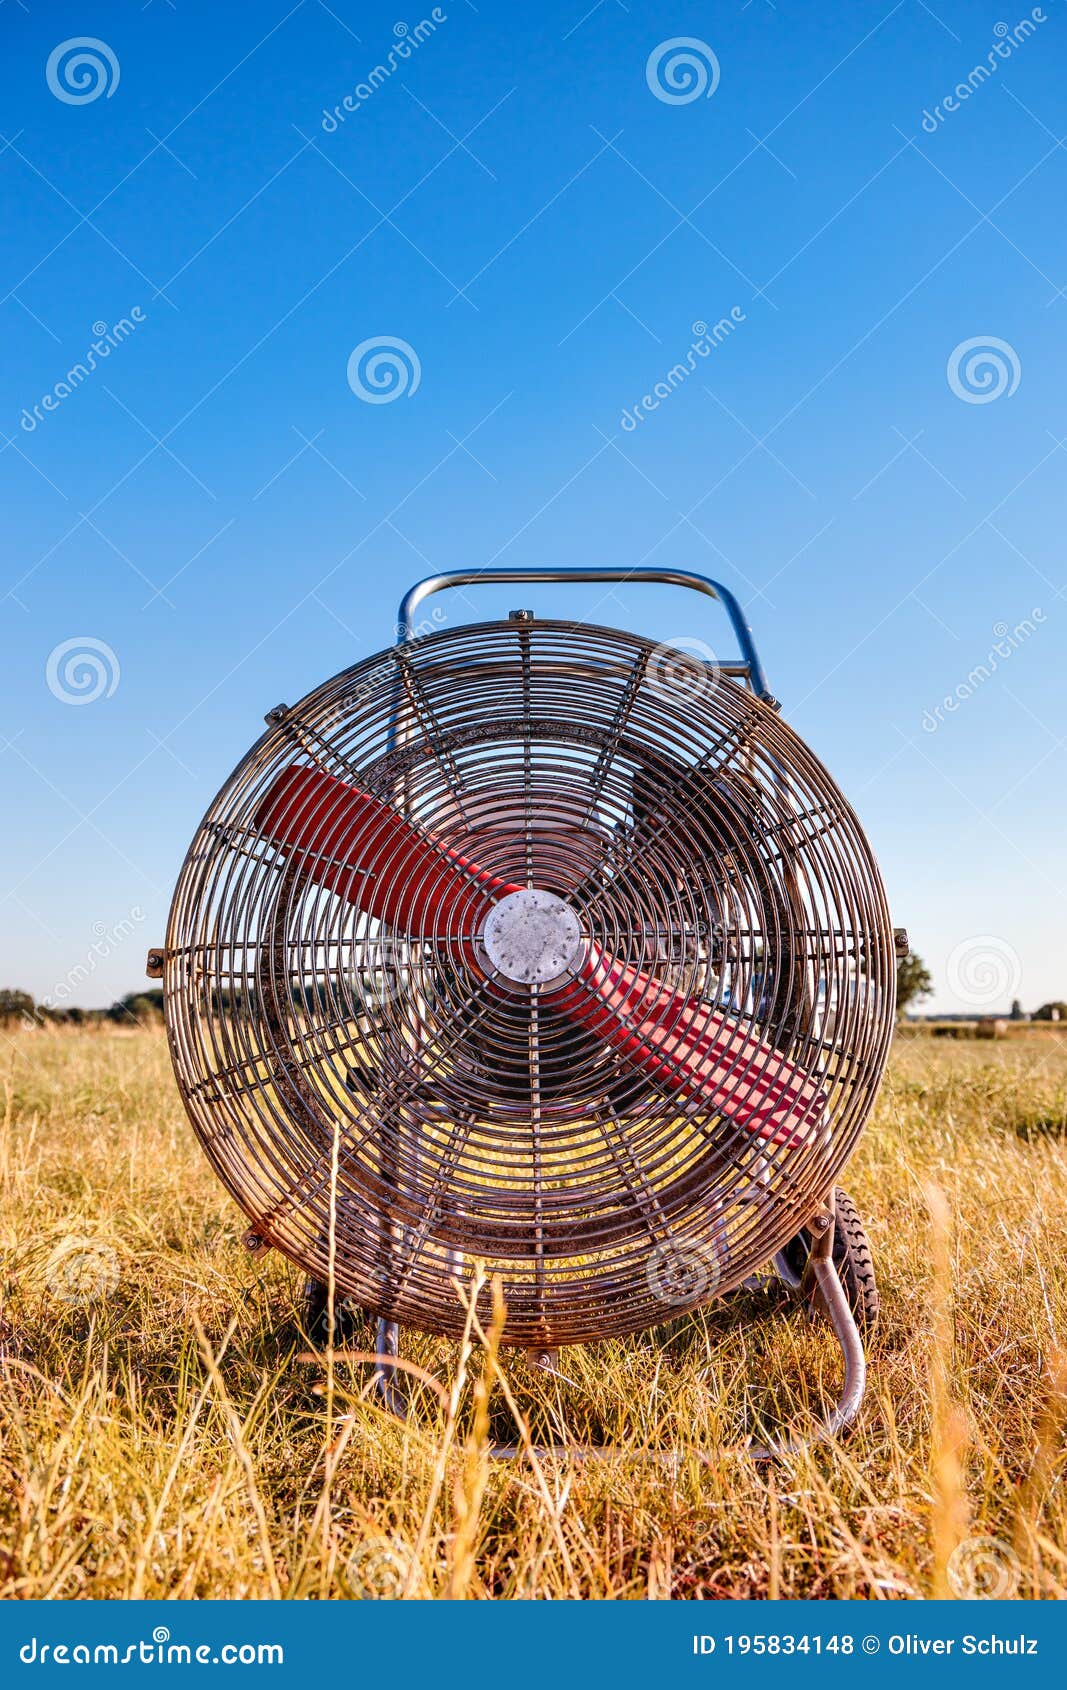 Gas Powered Inflation Fan for Blowing Up a Hot Air Balloon Standing on Dry Meadow in Summer with Blue Sky in Background Stock - Image of single, people: 195834148